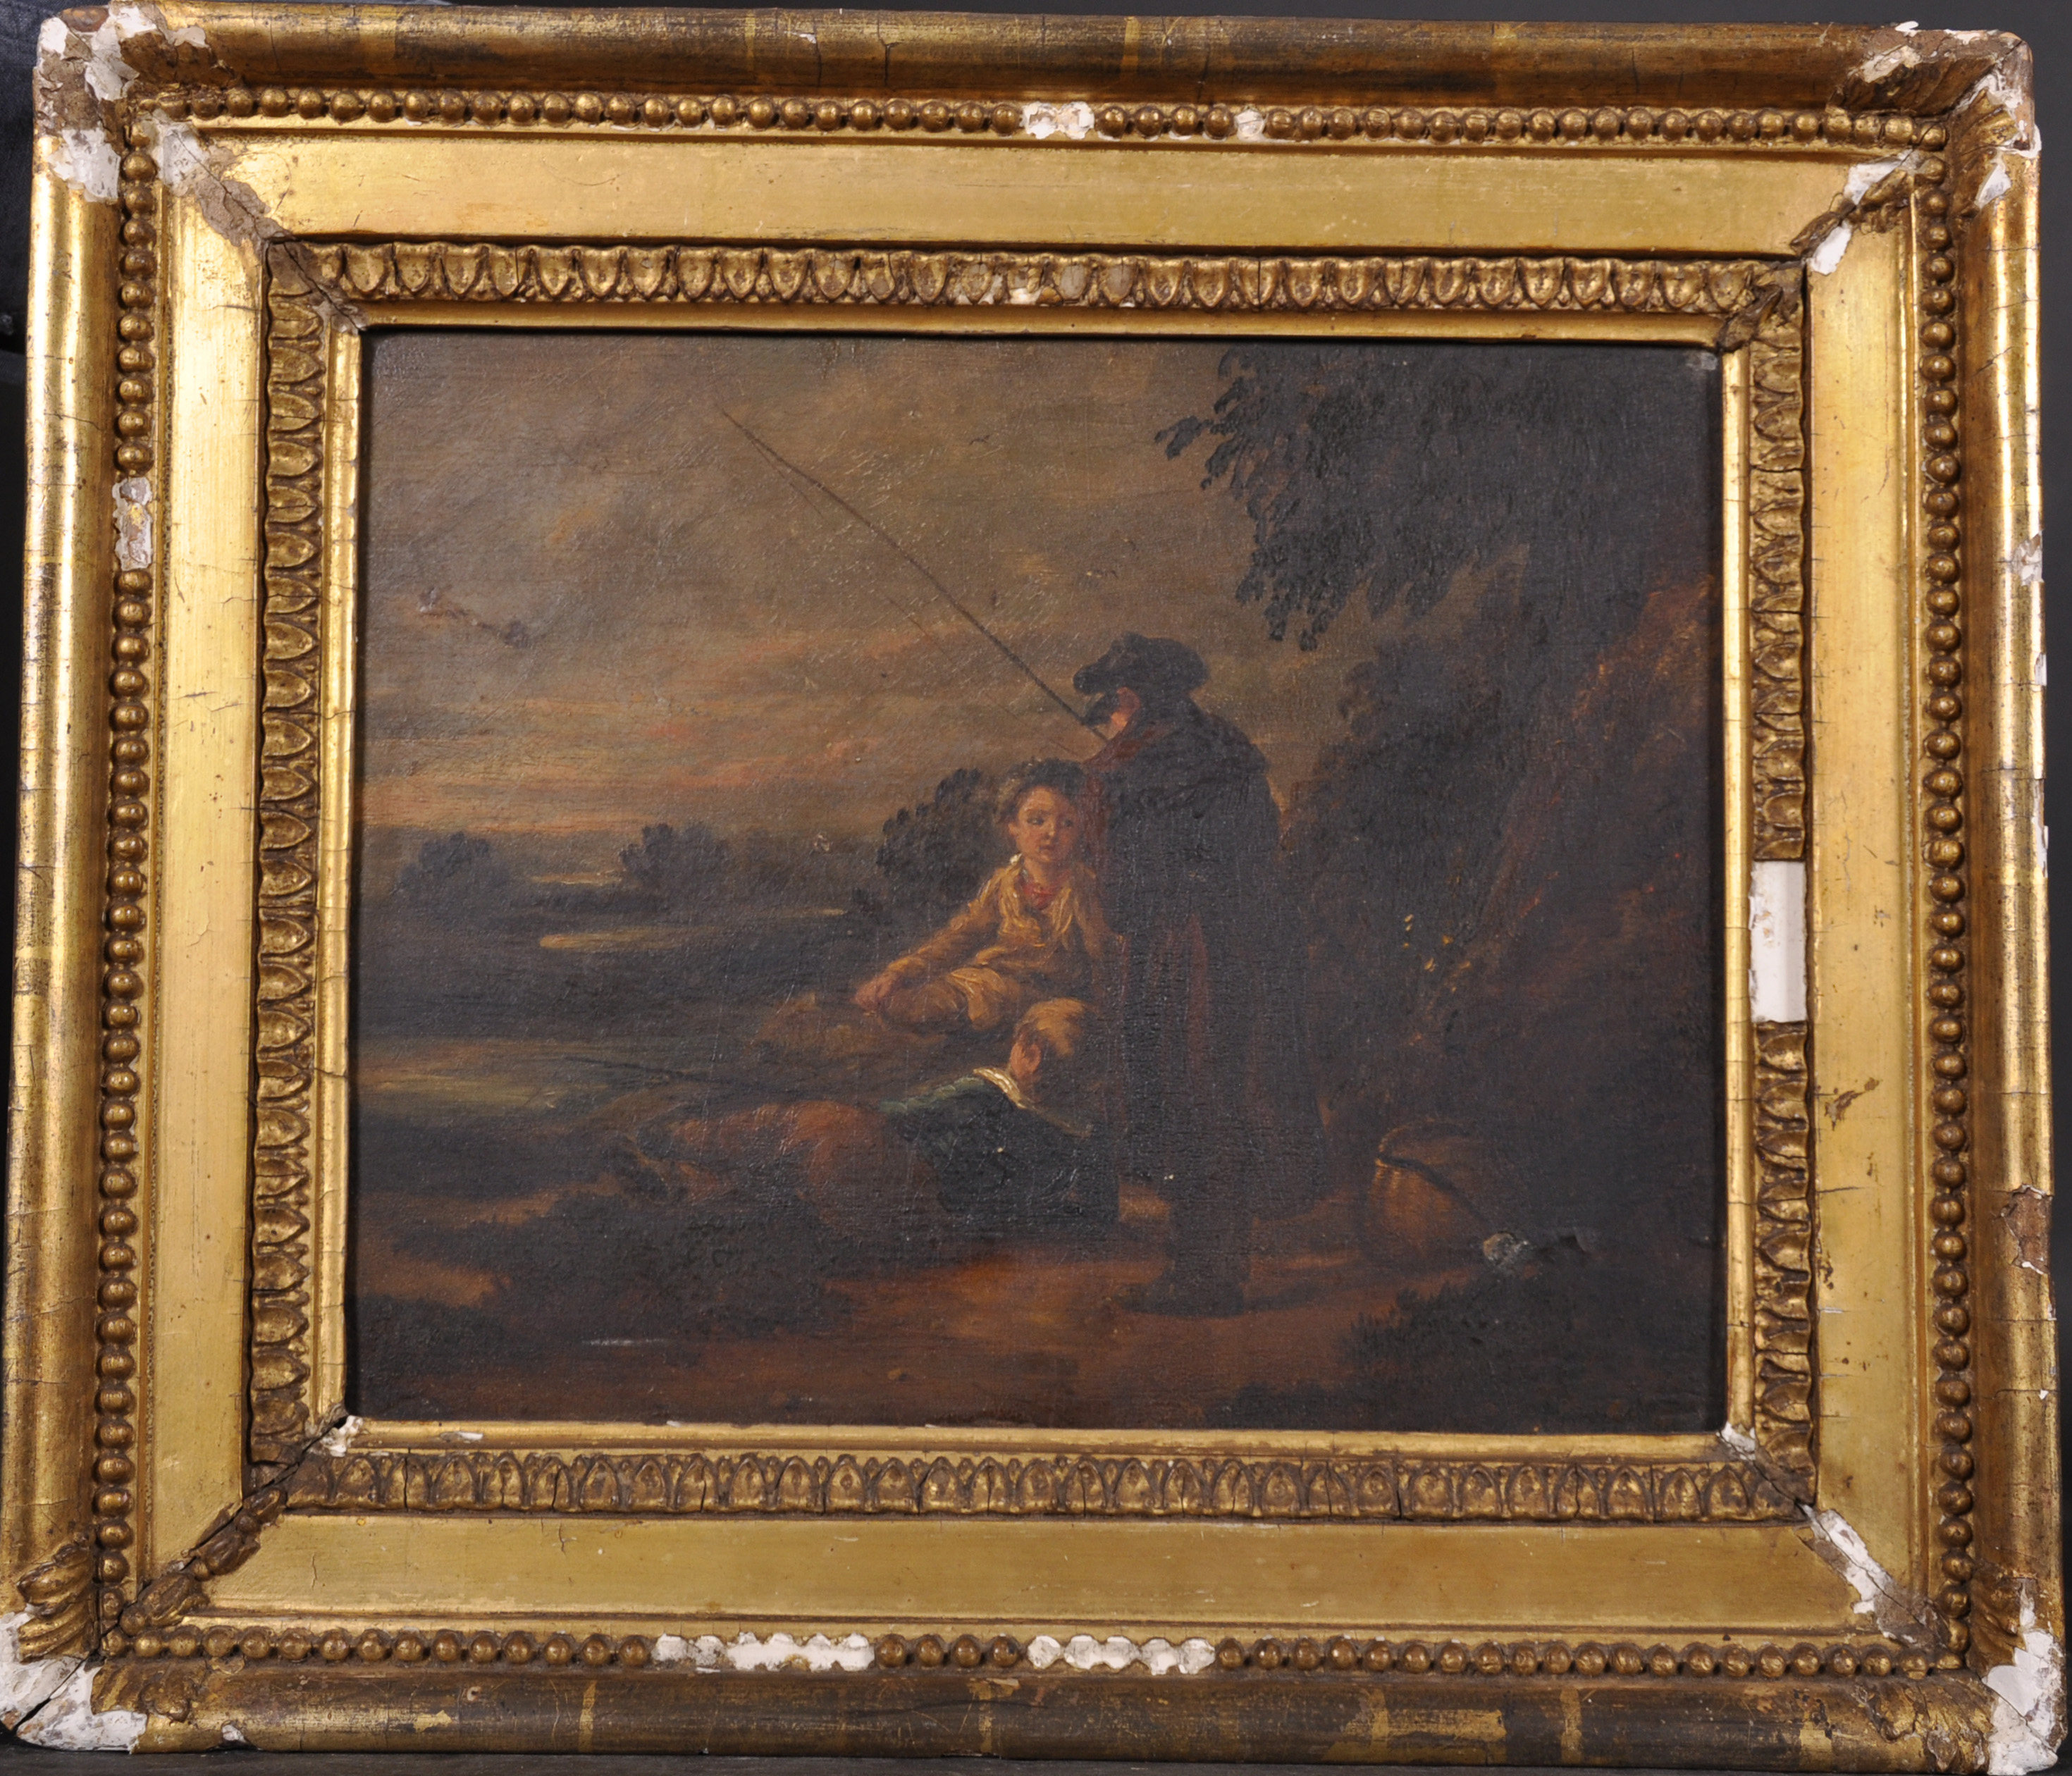 Late 18th Century English School. Young Boys Fishing, Oil on Panel, 9.5” x 12” (24.2 x 30.5cm) - Image 2 of 3